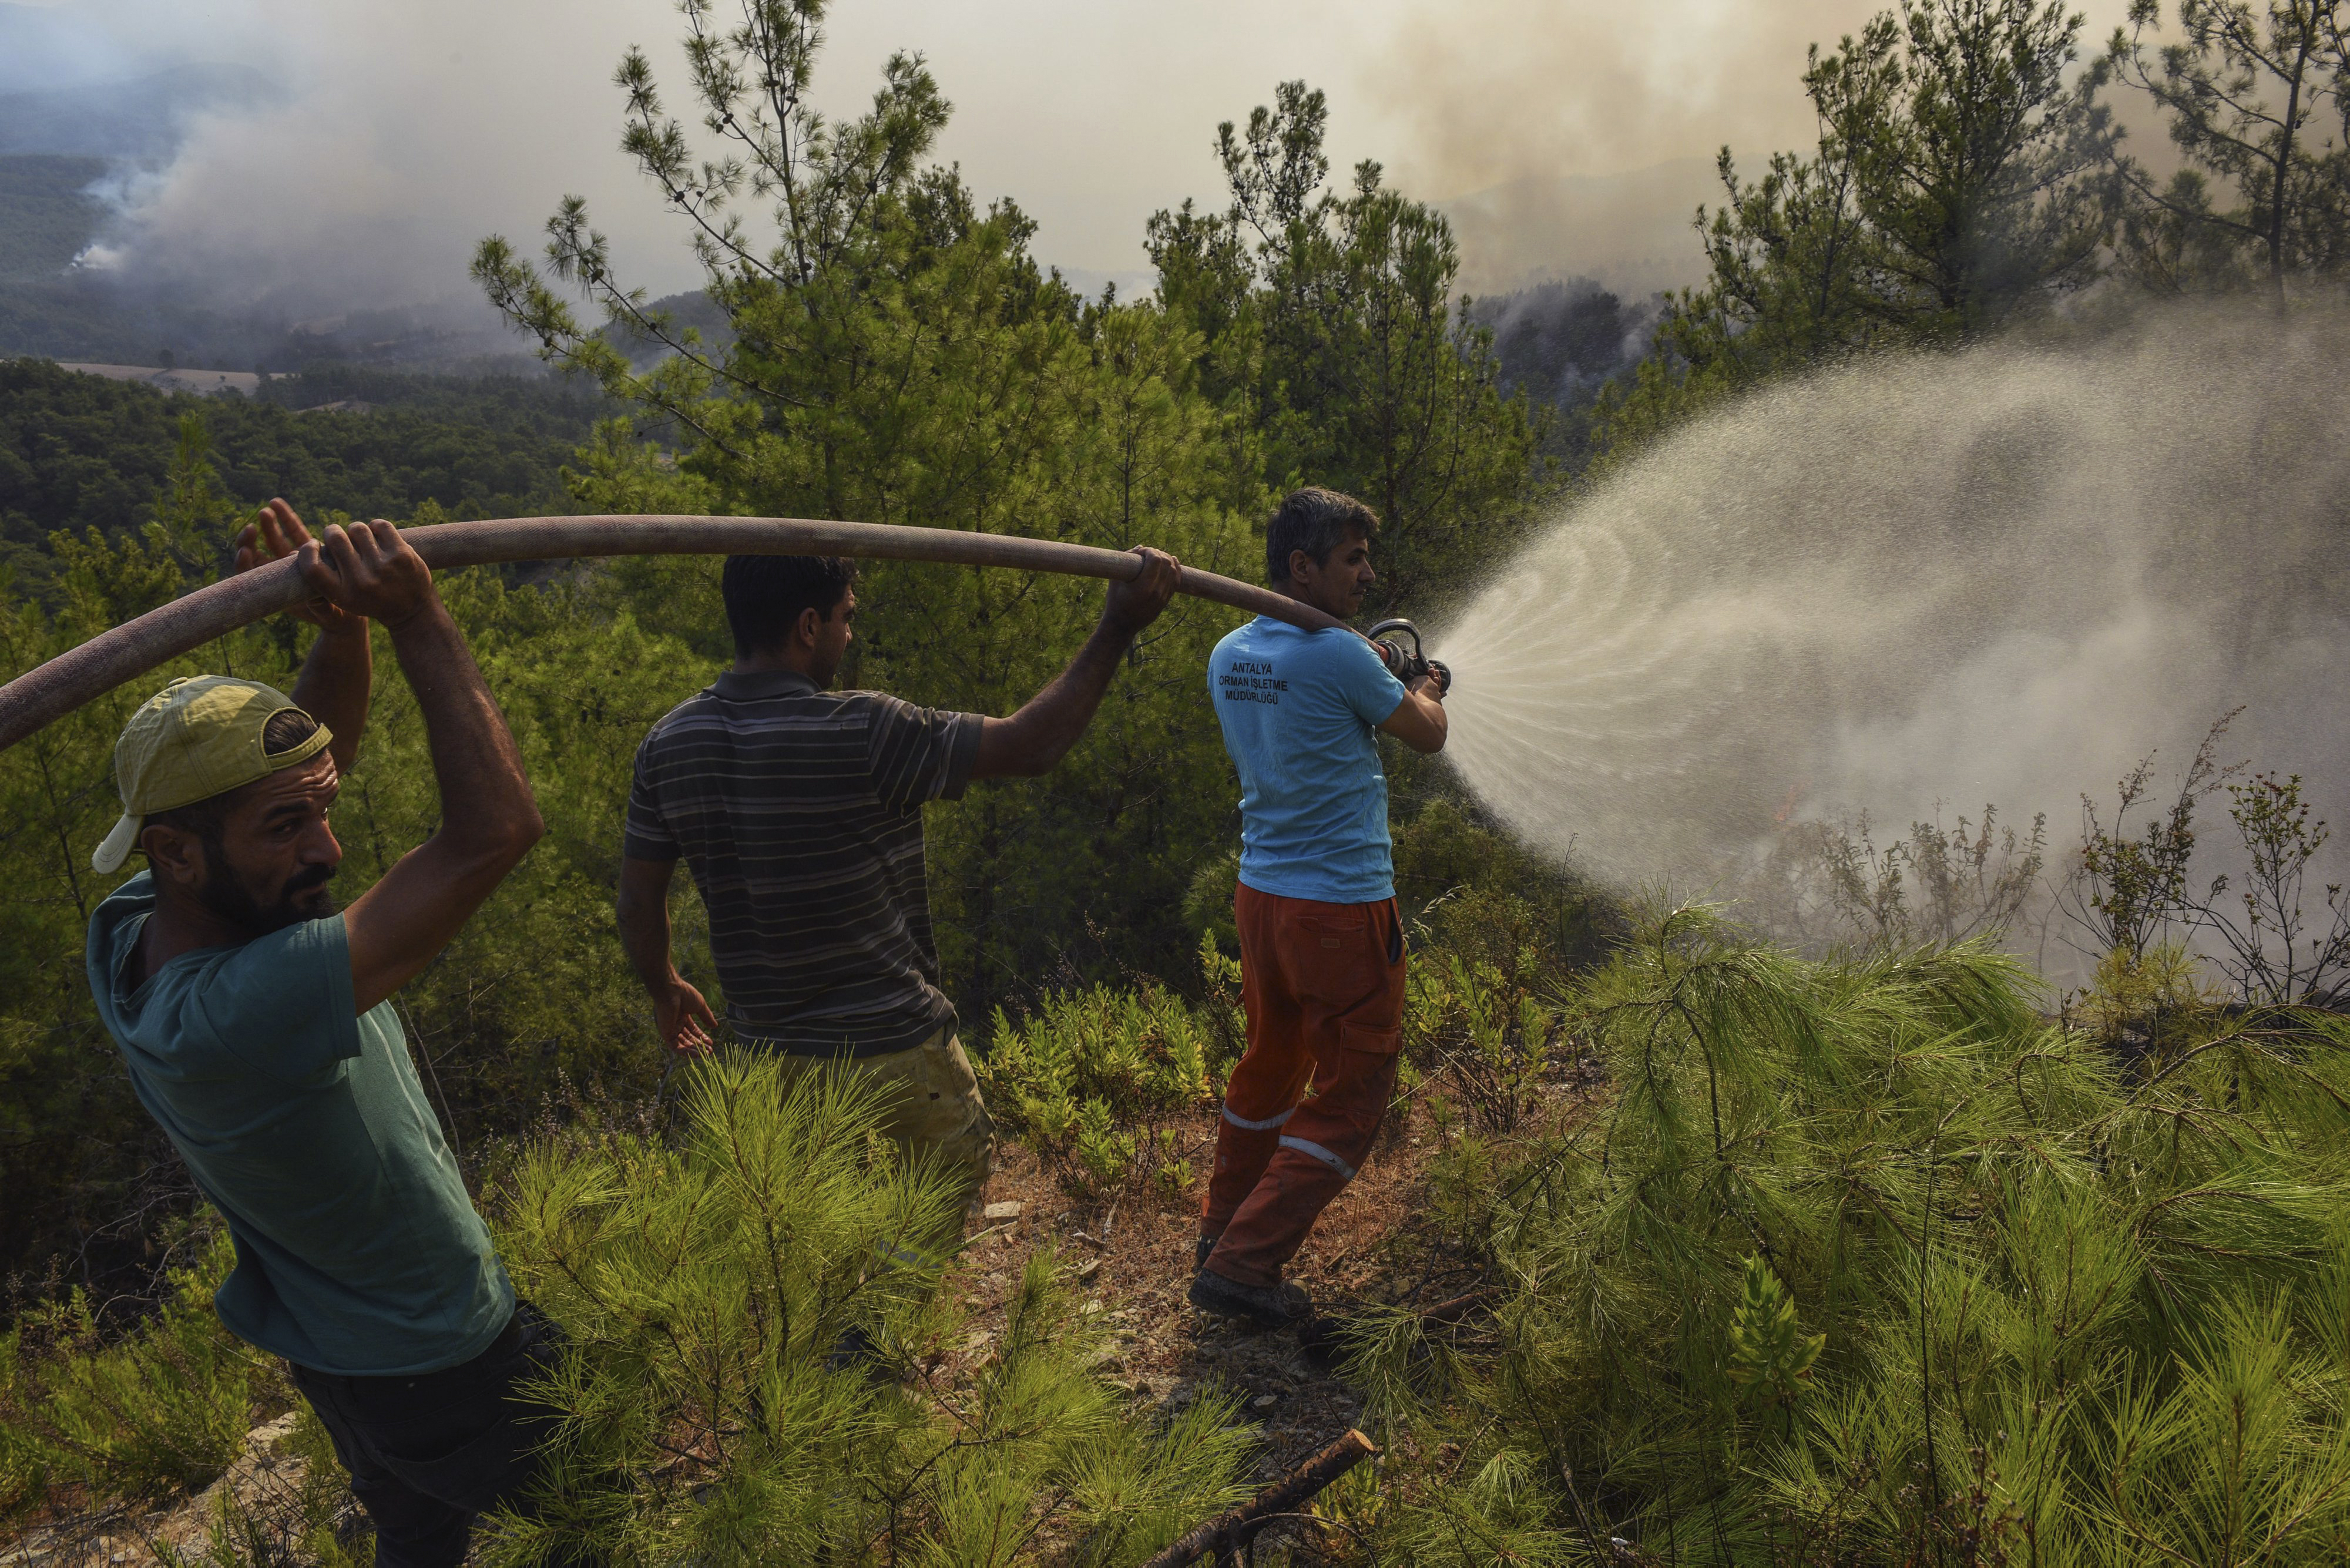 Villagers using a hose to fight fires in Turkey